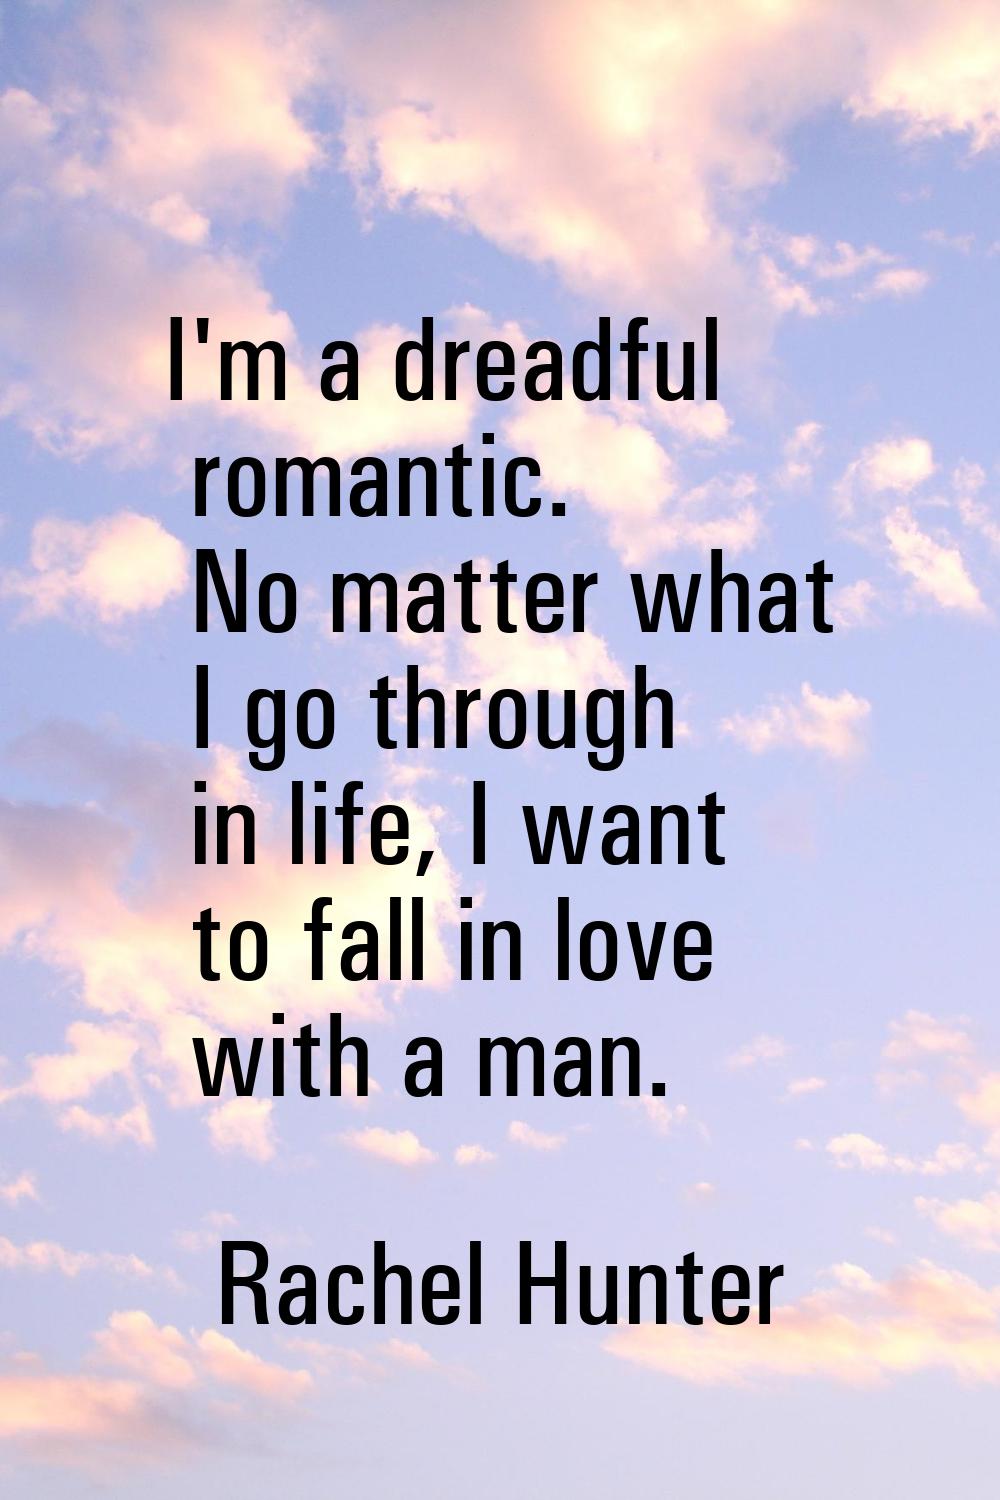 I'm a dreadful romantic. No matter what I go through in life, I want to fall in love with a man.